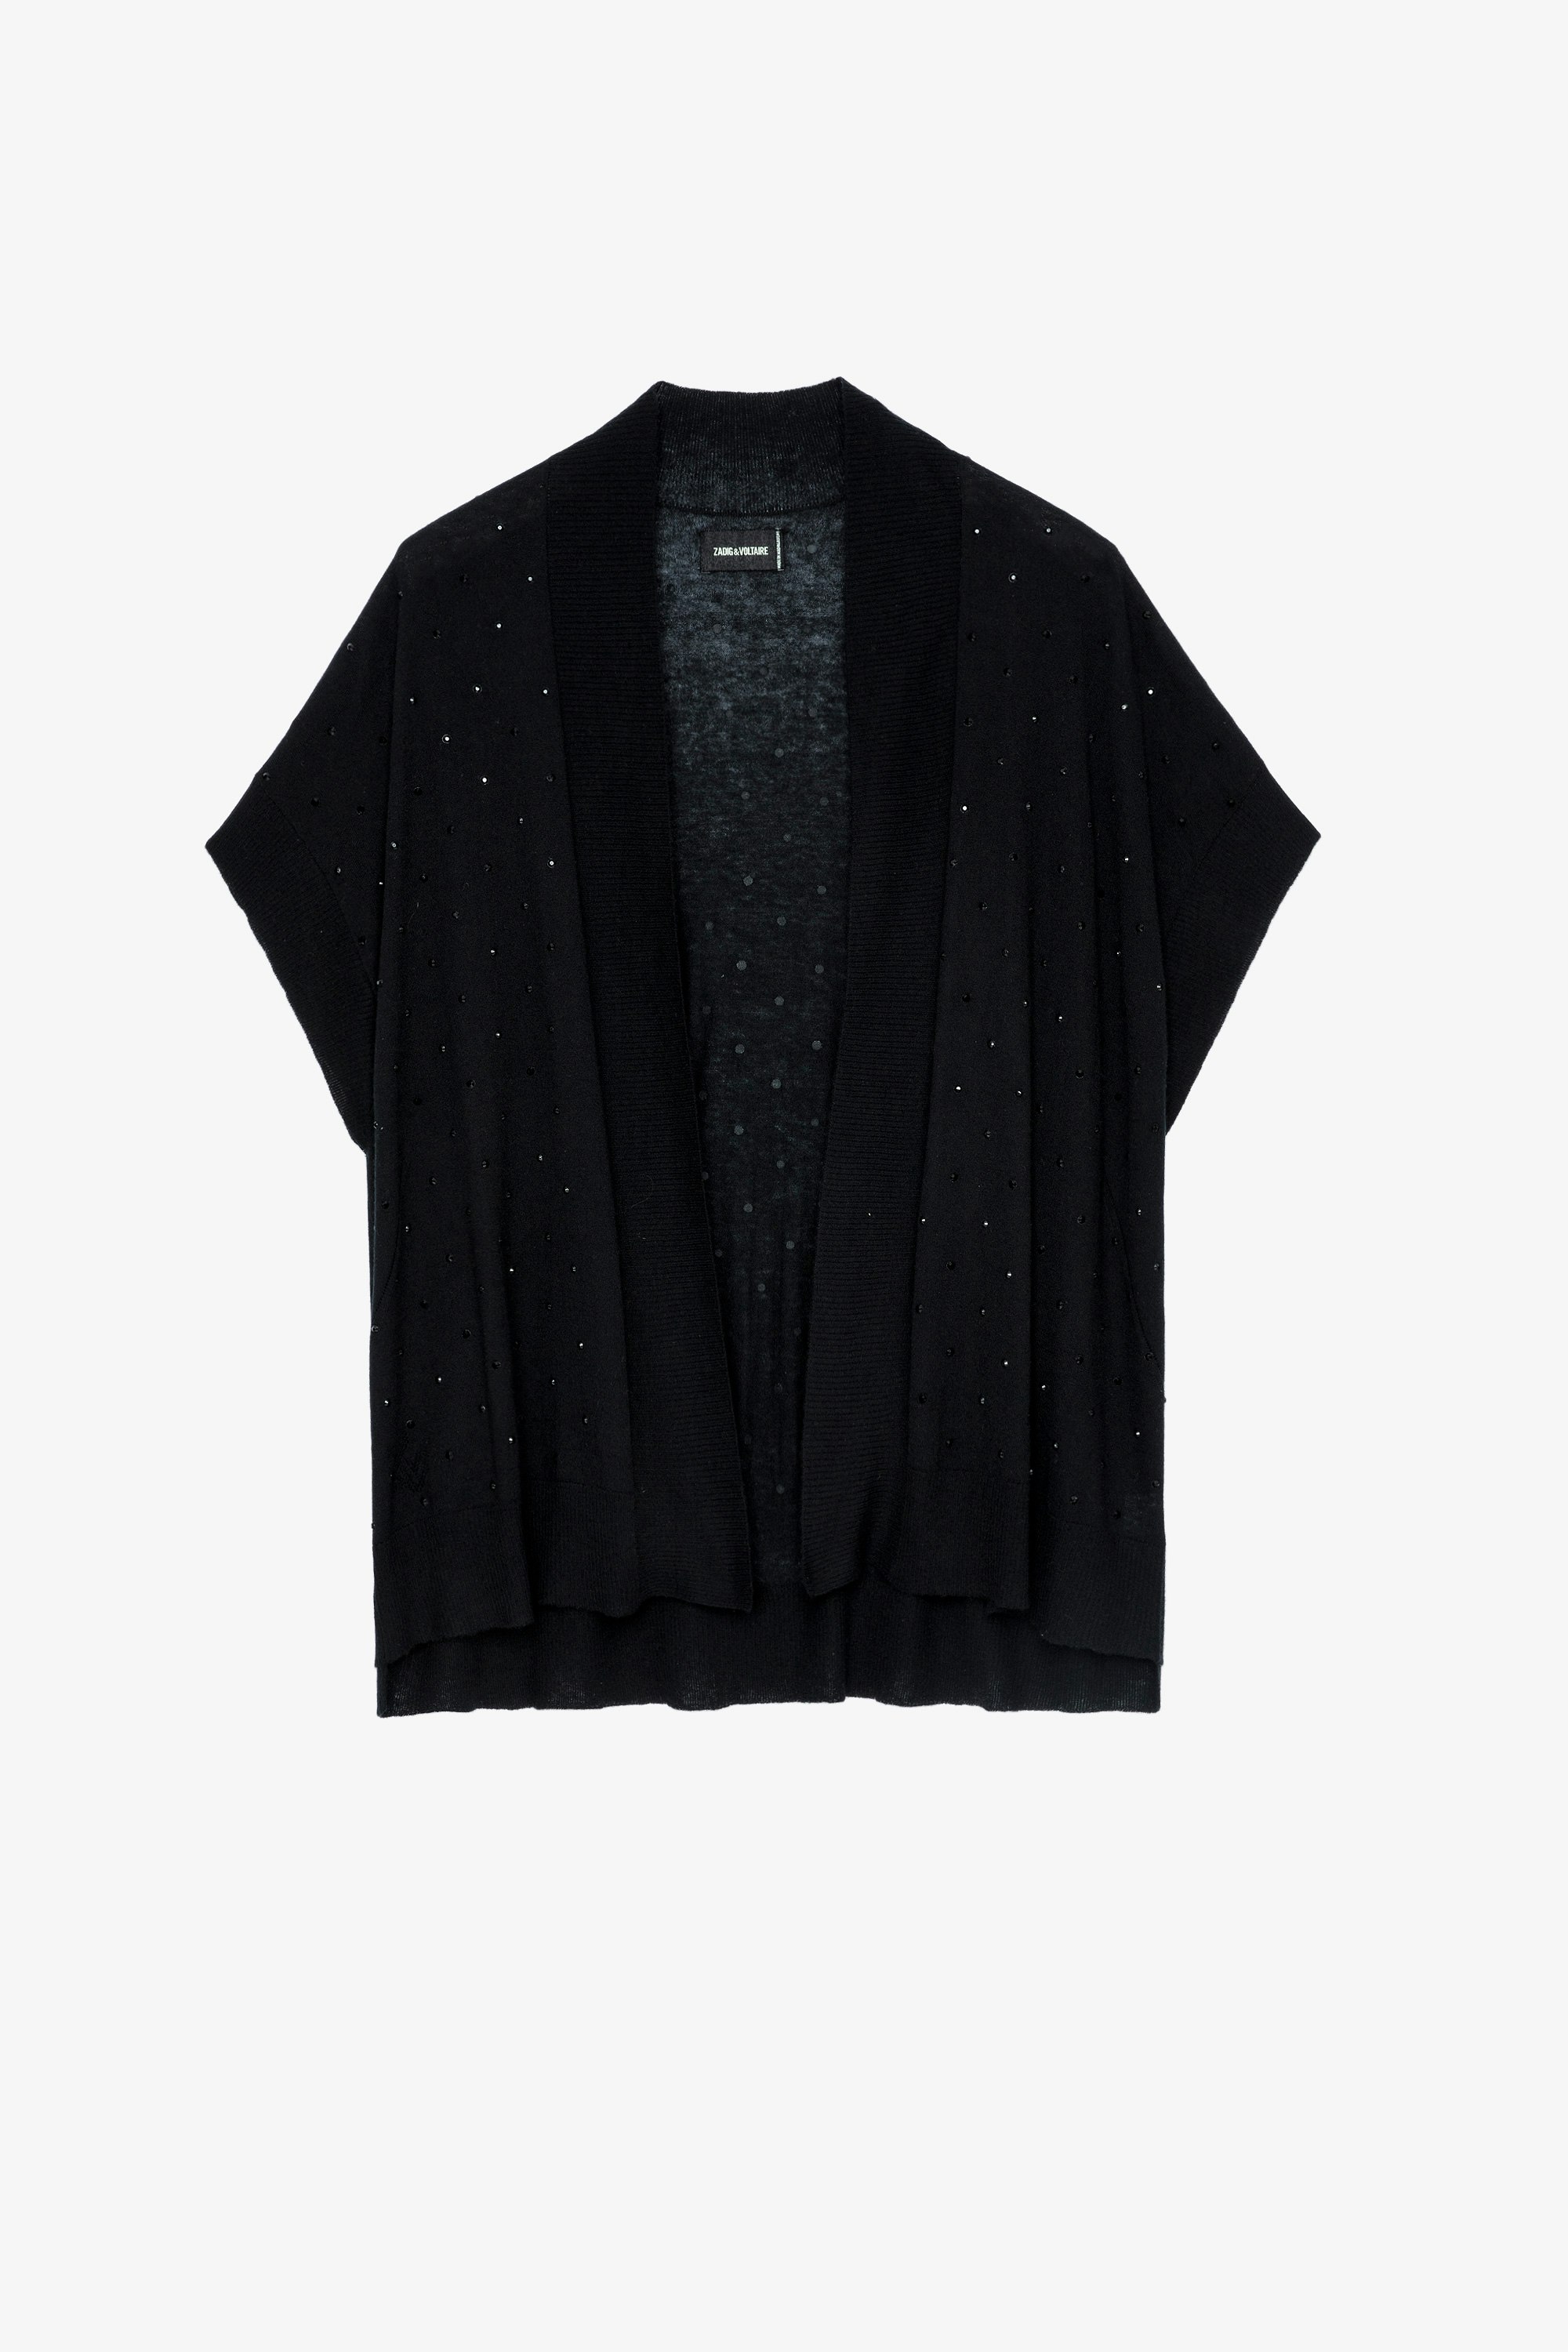 Indian カシミヤ カーディガン Women’s black feather cashmere sleeveless cardigan with crystal embellishment